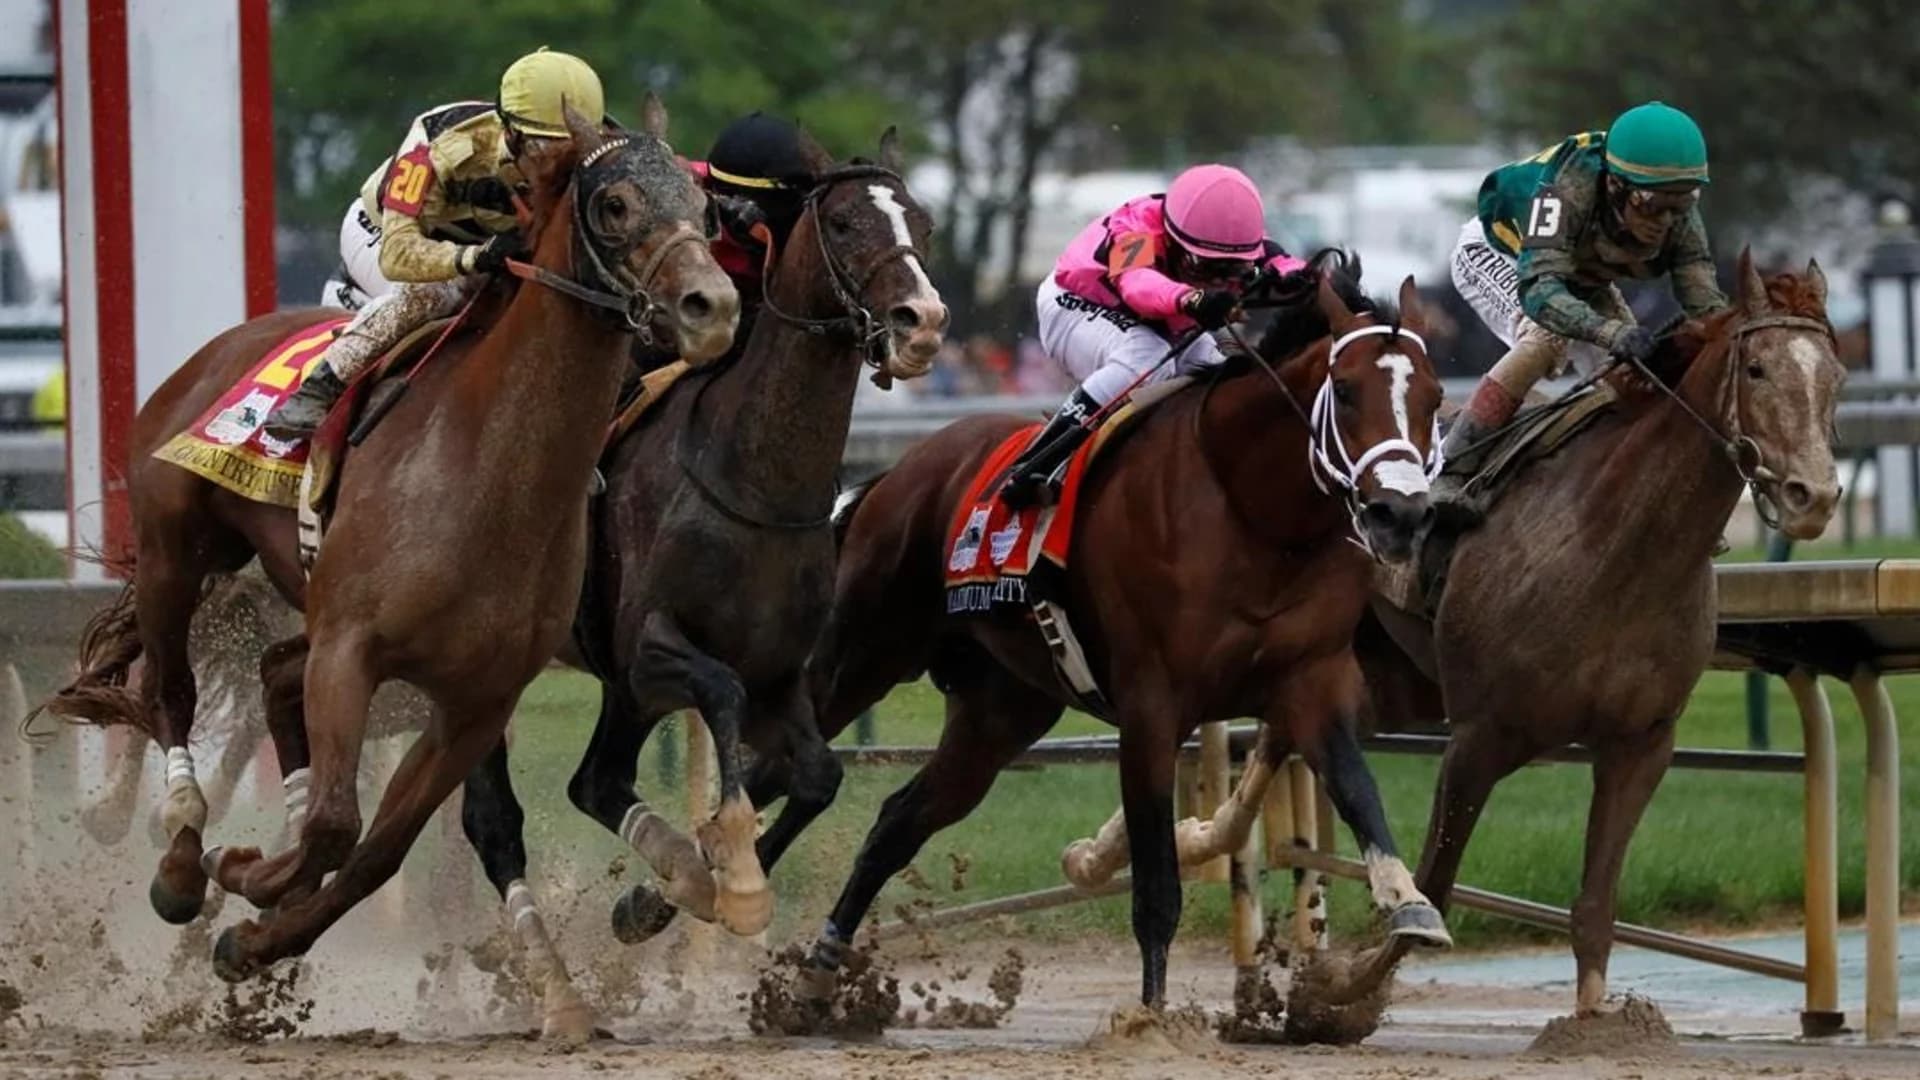 145th running of the Kentucky Derby ends in DQ stunner